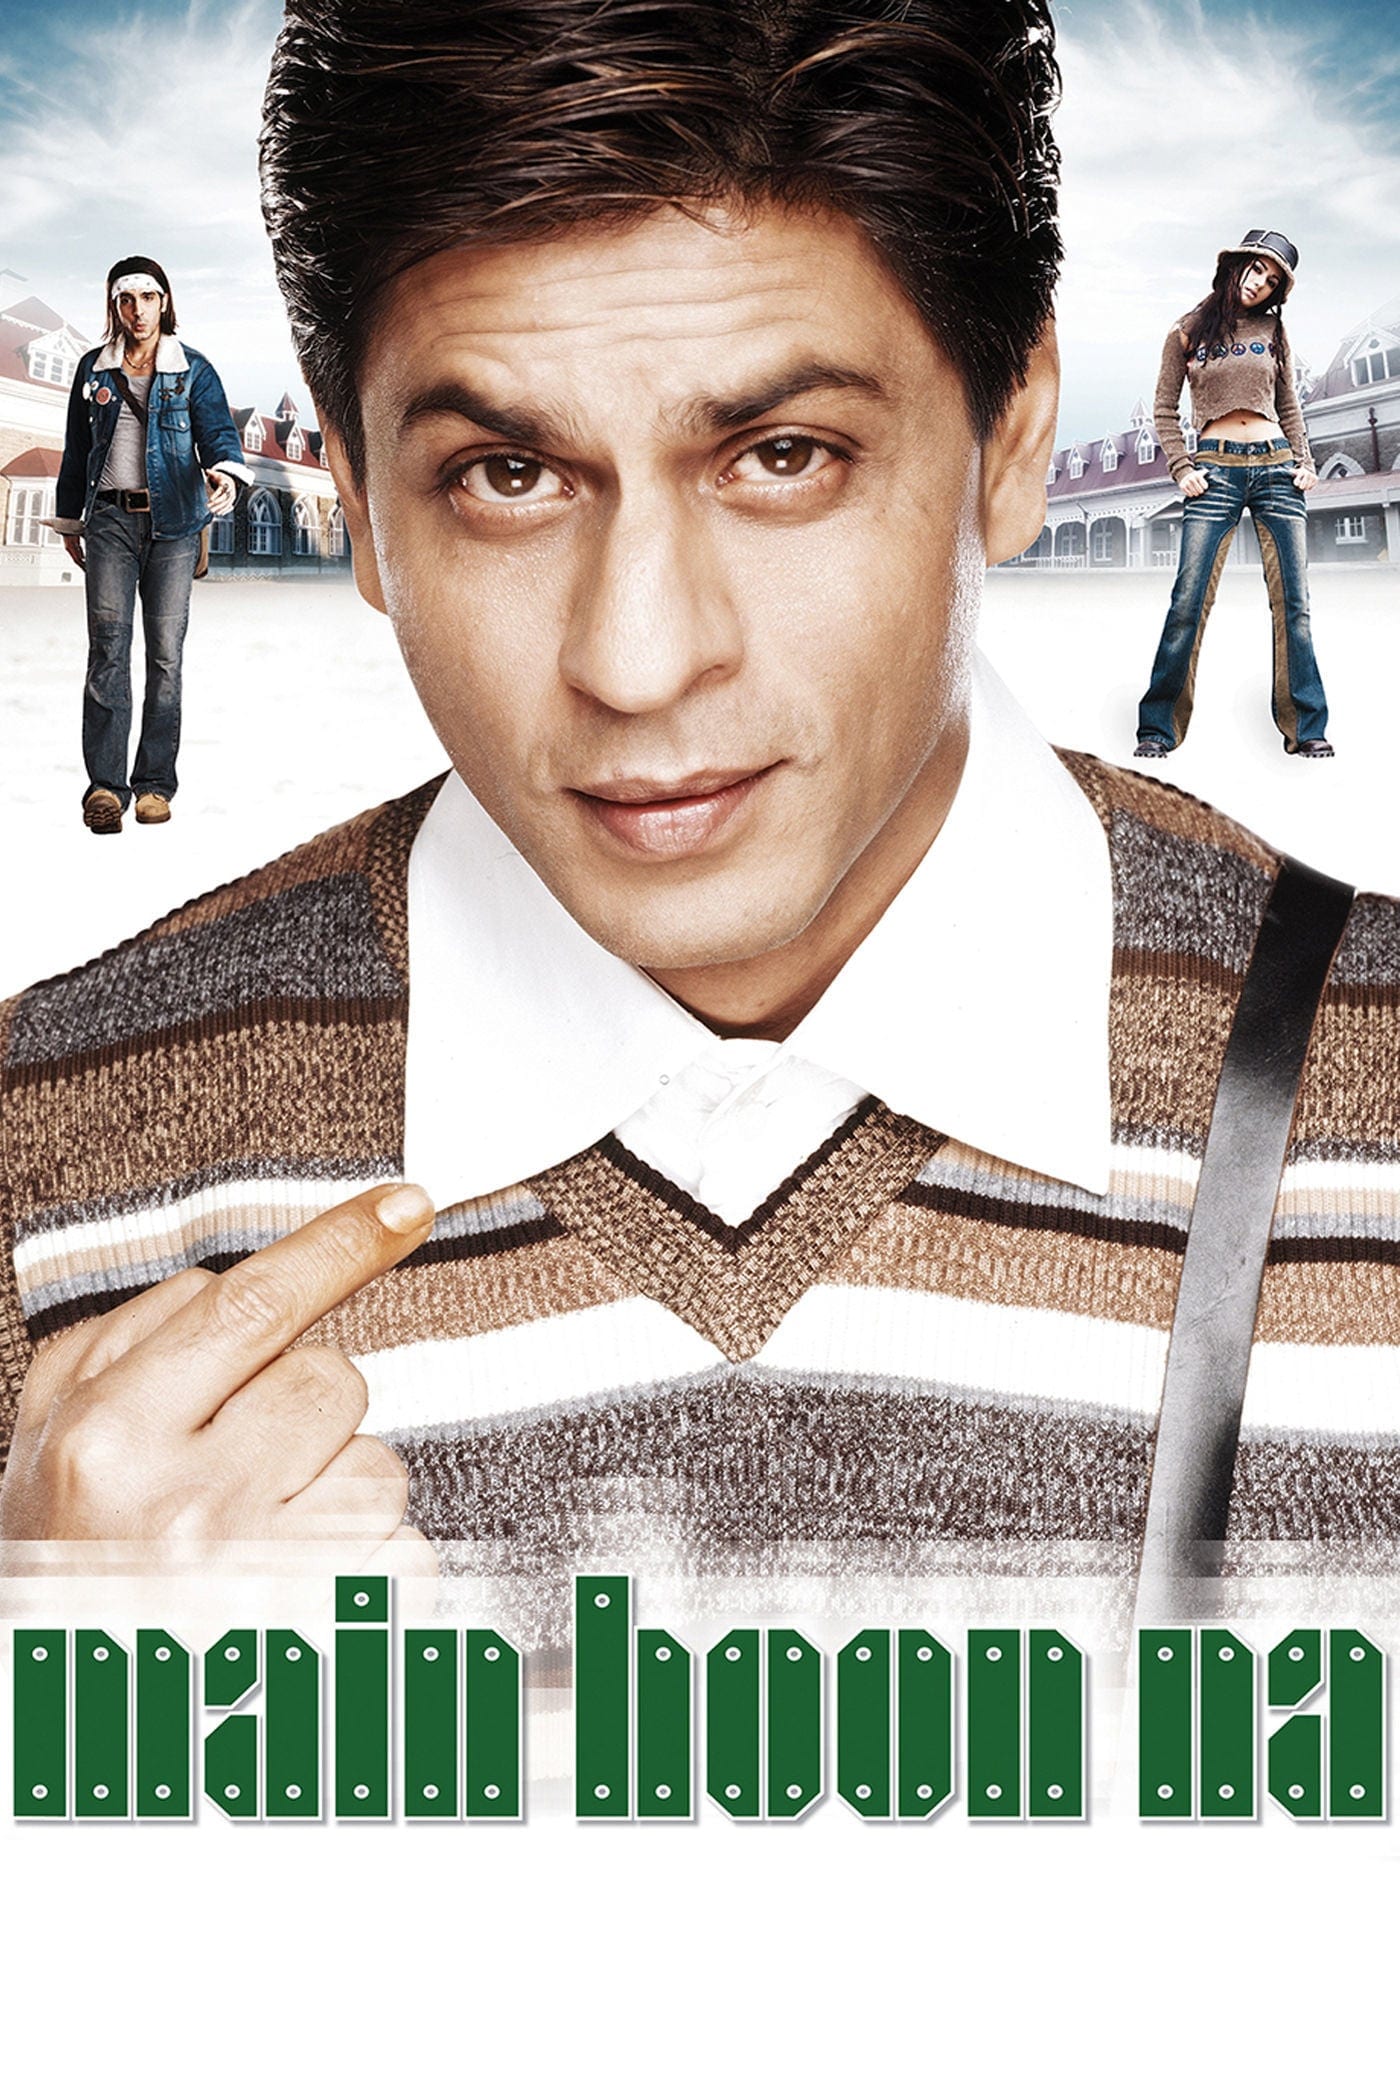 Poster for the movie "Main Hoon Na"